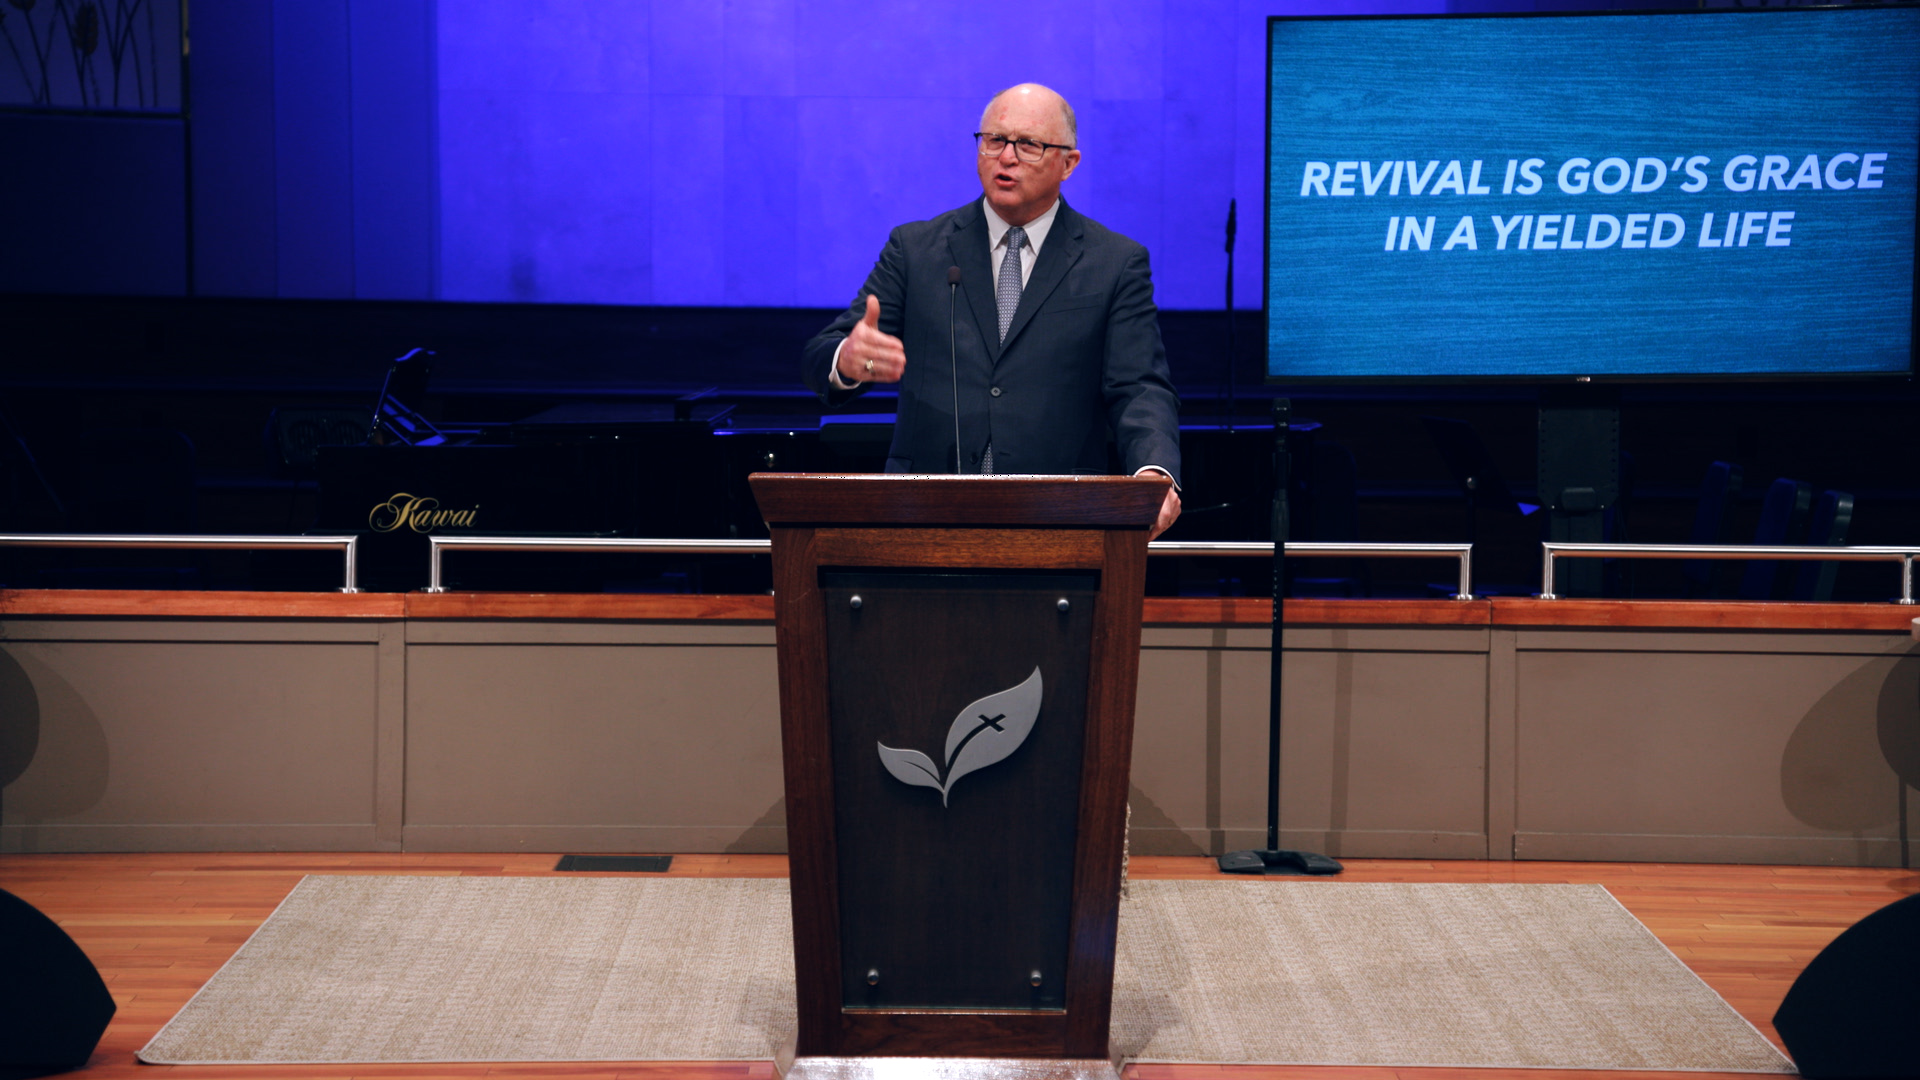 Pastor Paul Chappell: Revival Is God's Grace In A Yielded Life